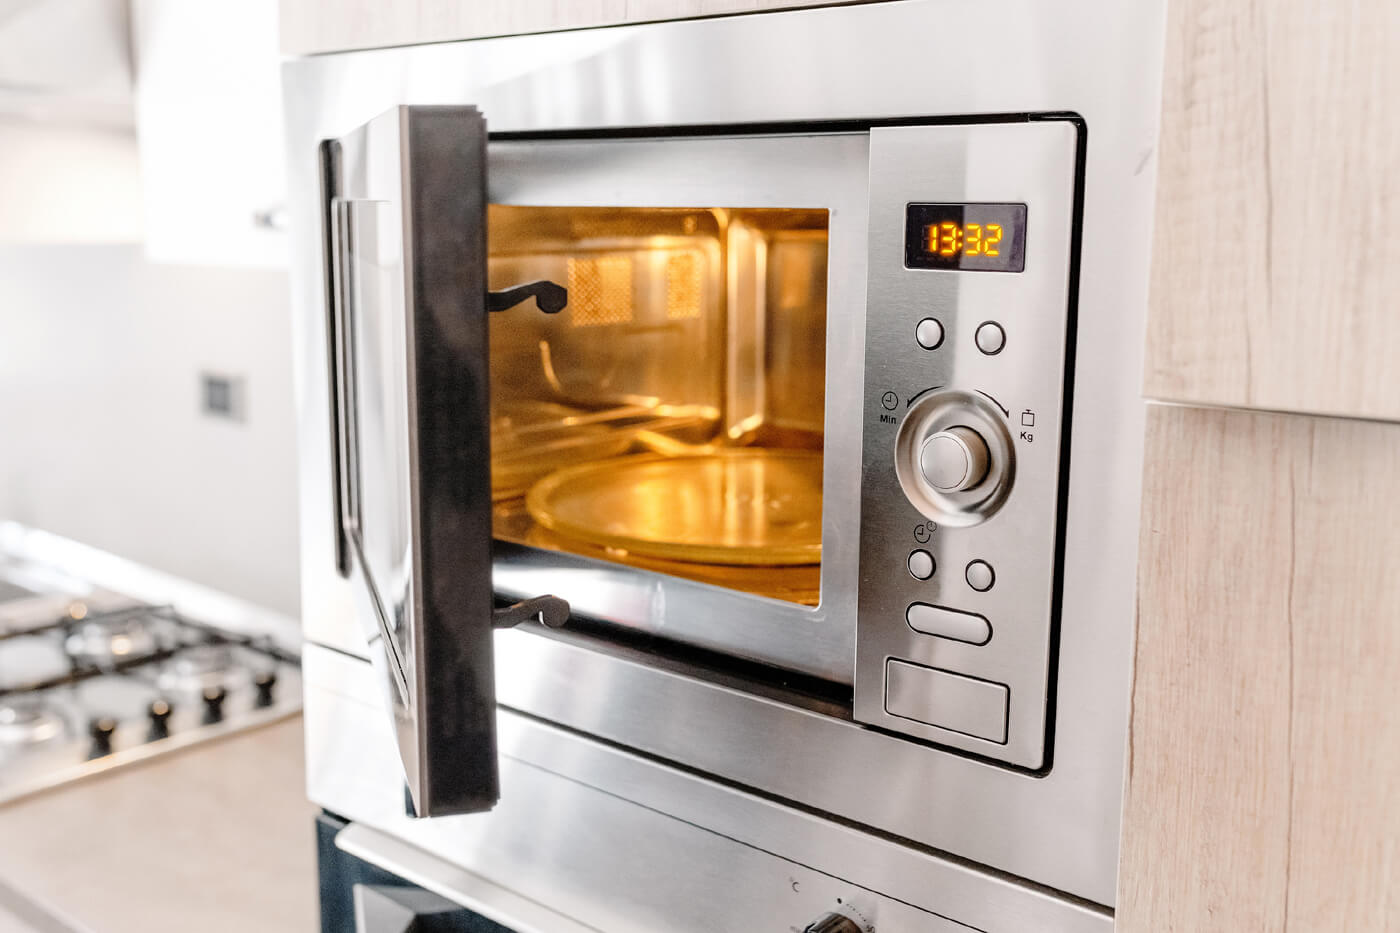 Microwave constantly on is wasting energy